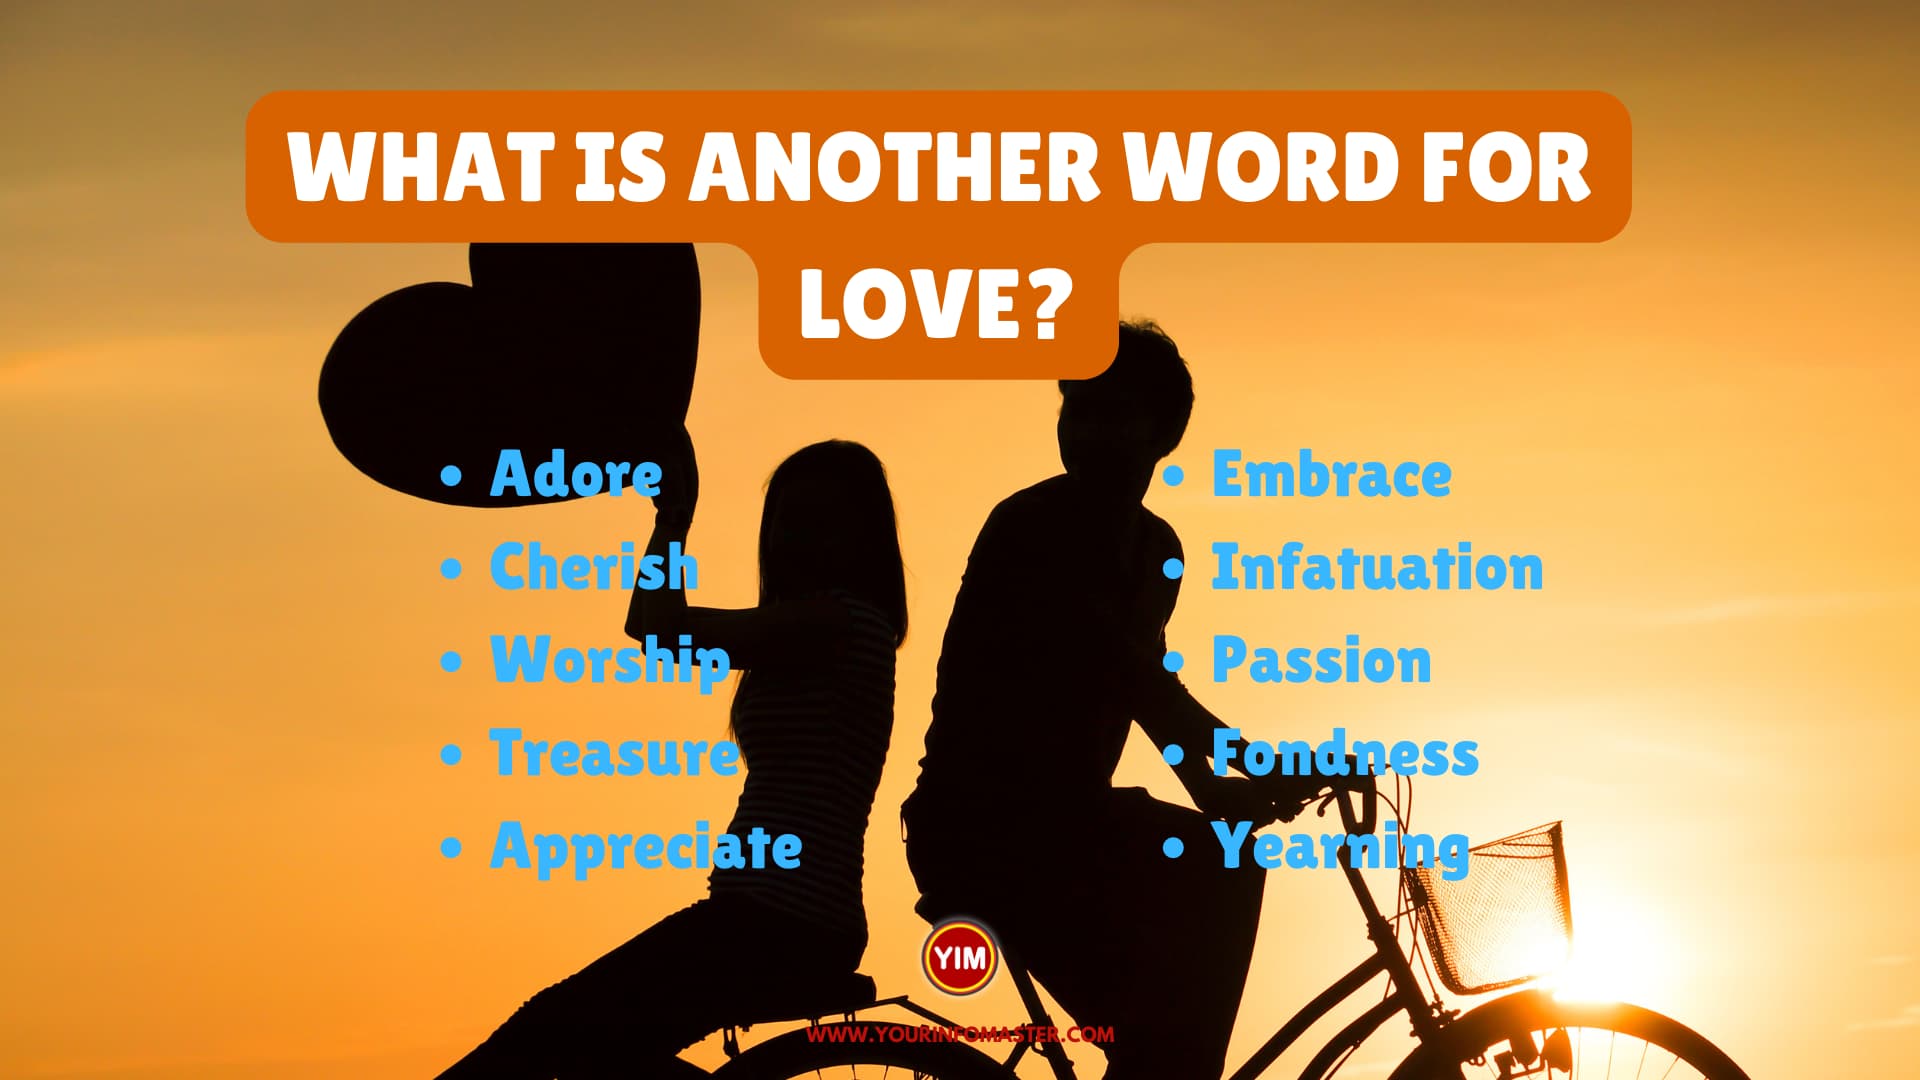 What is another word for Love